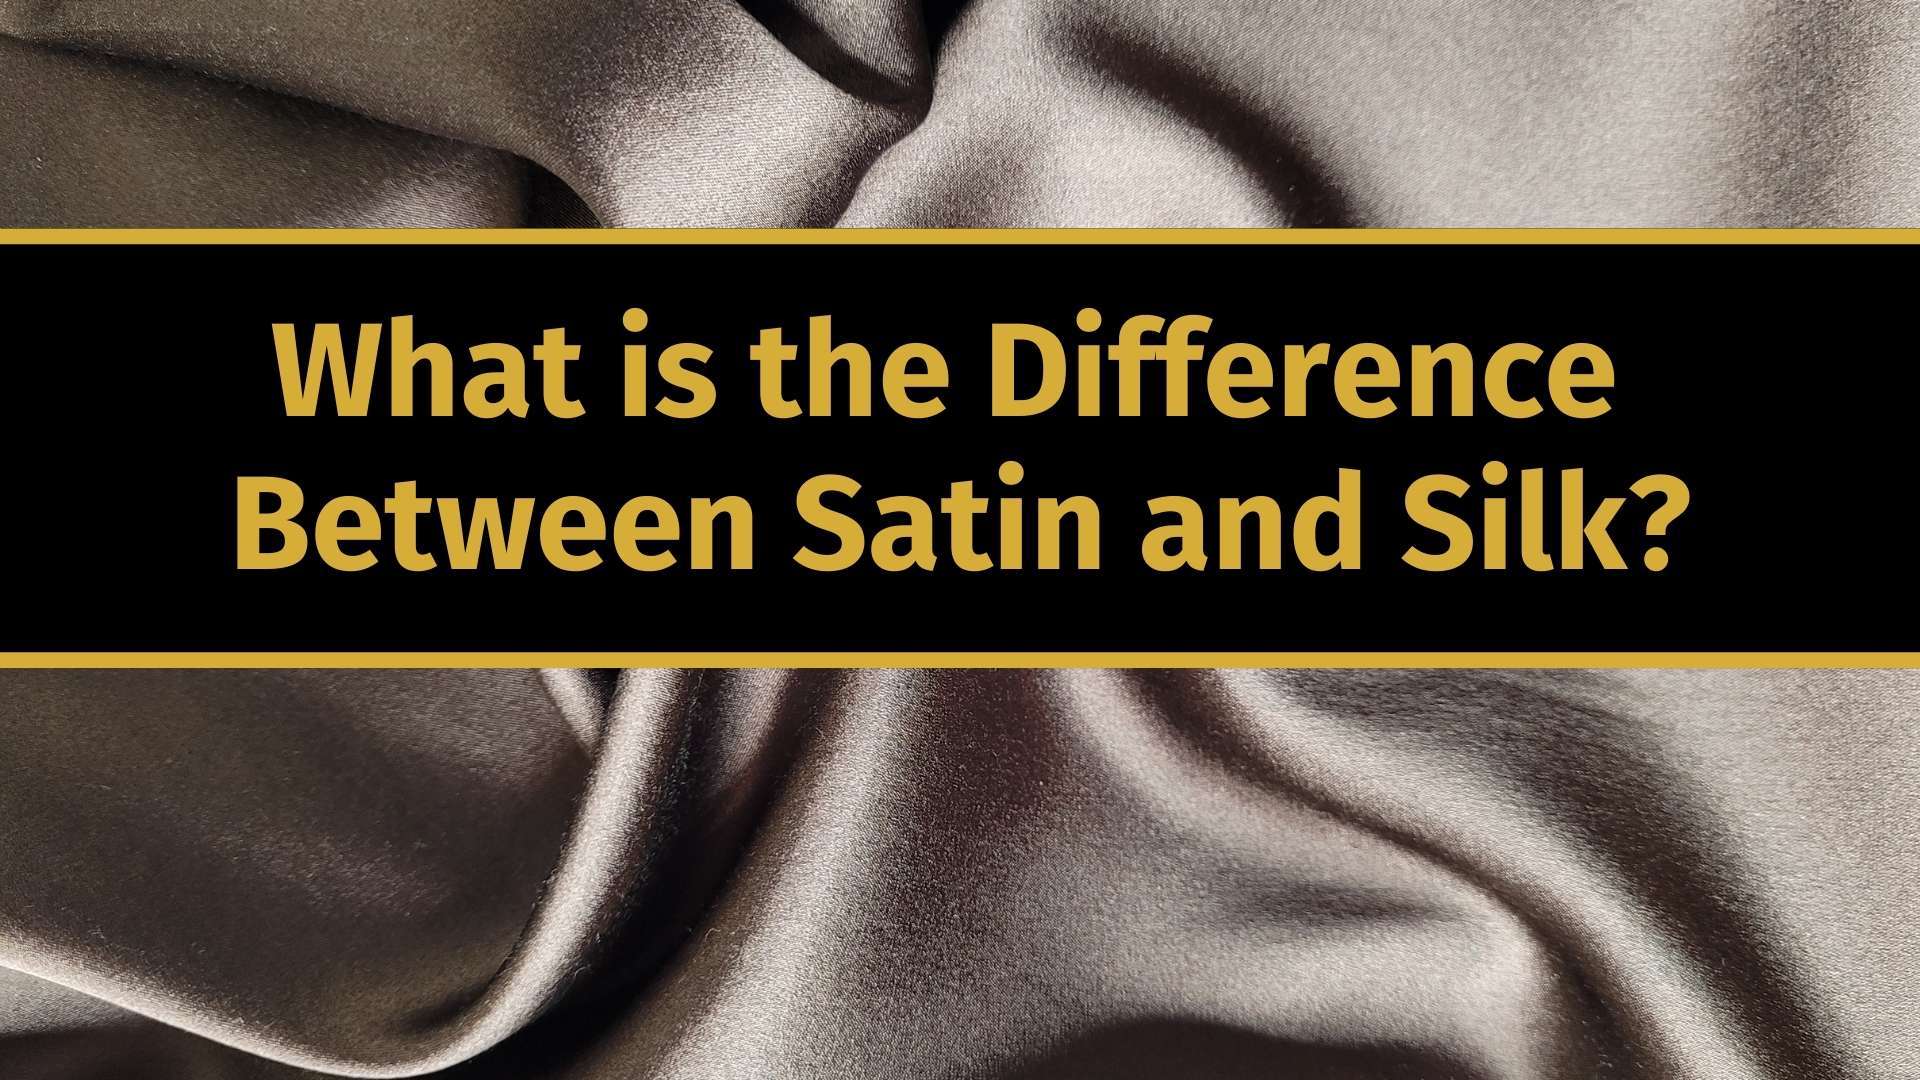 what is the difference between satin and silk banner image